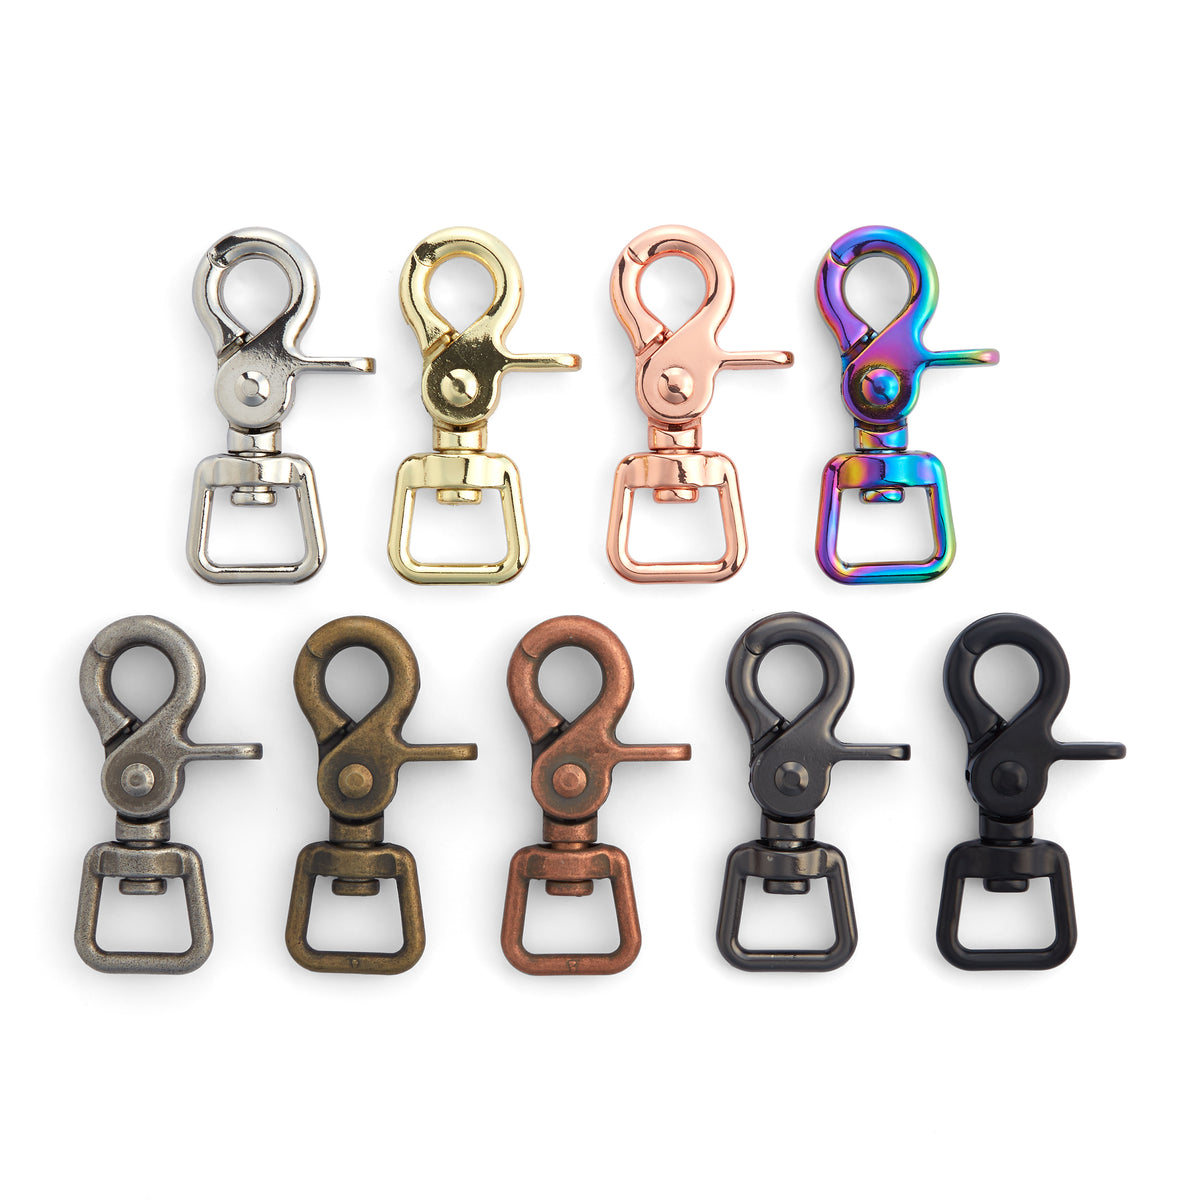 Quality Chrome 2-3/4 Trigger Snap Hook 5/8 Swivel Eye - Great for Pet  Leashes, Bag Straps